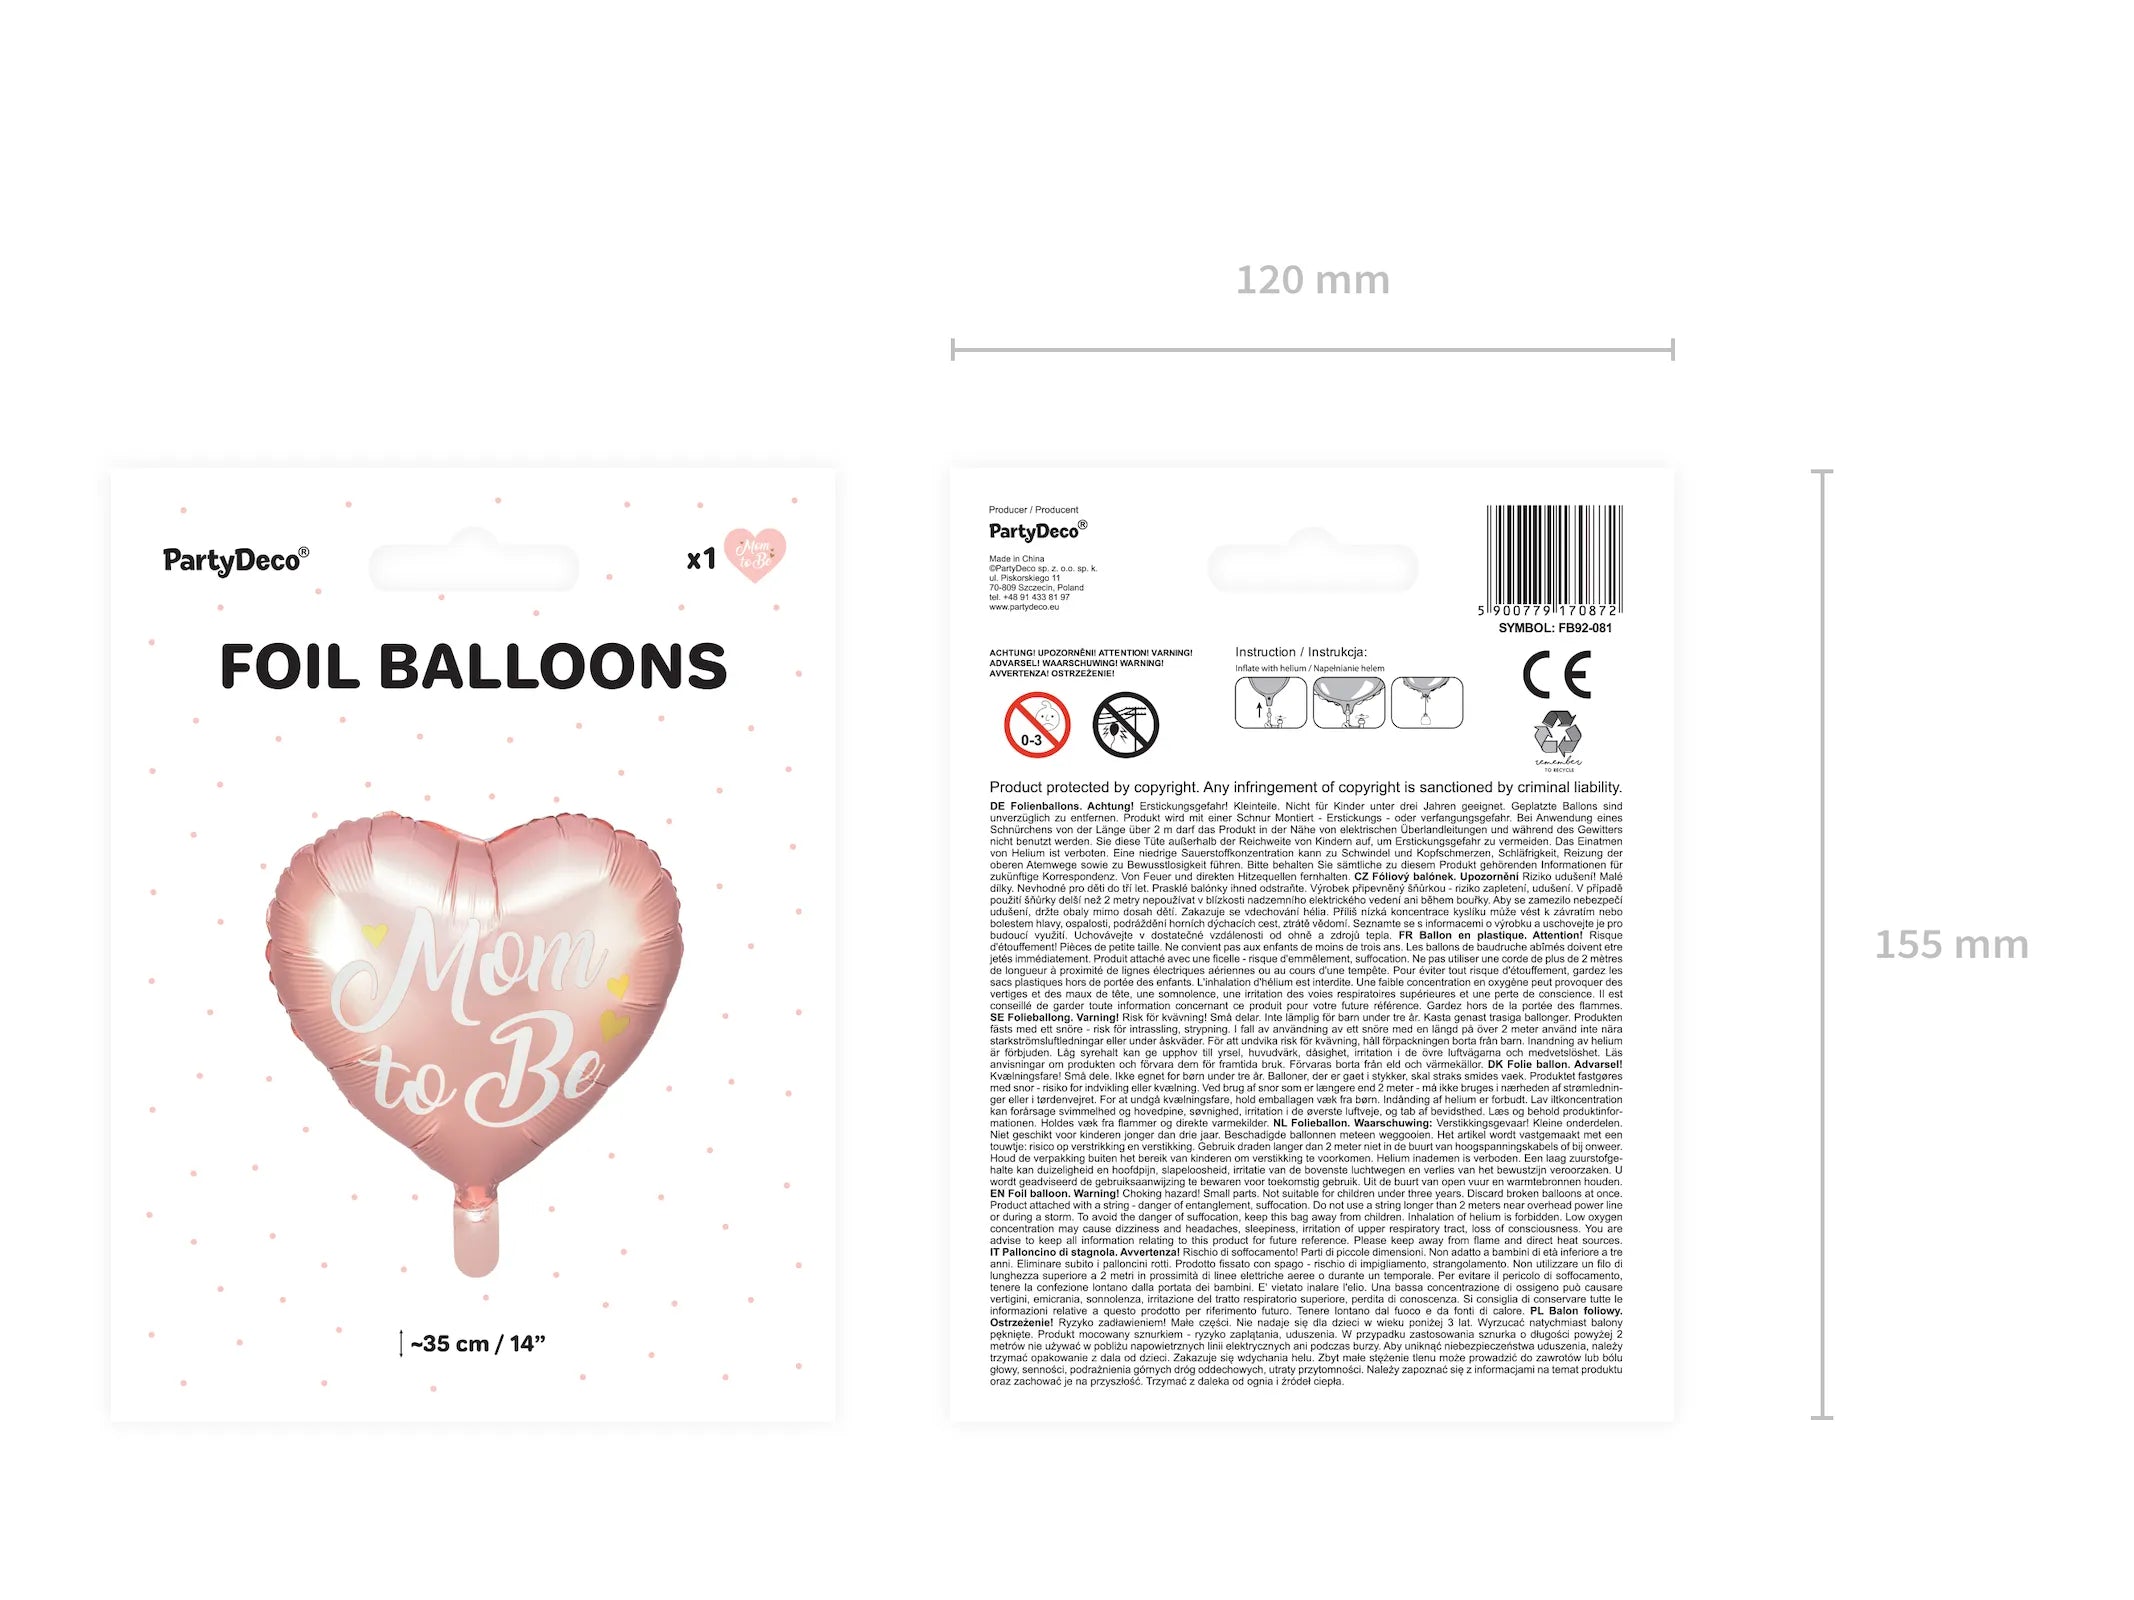 Foil balloon Mom to Be, 13.8in, pink